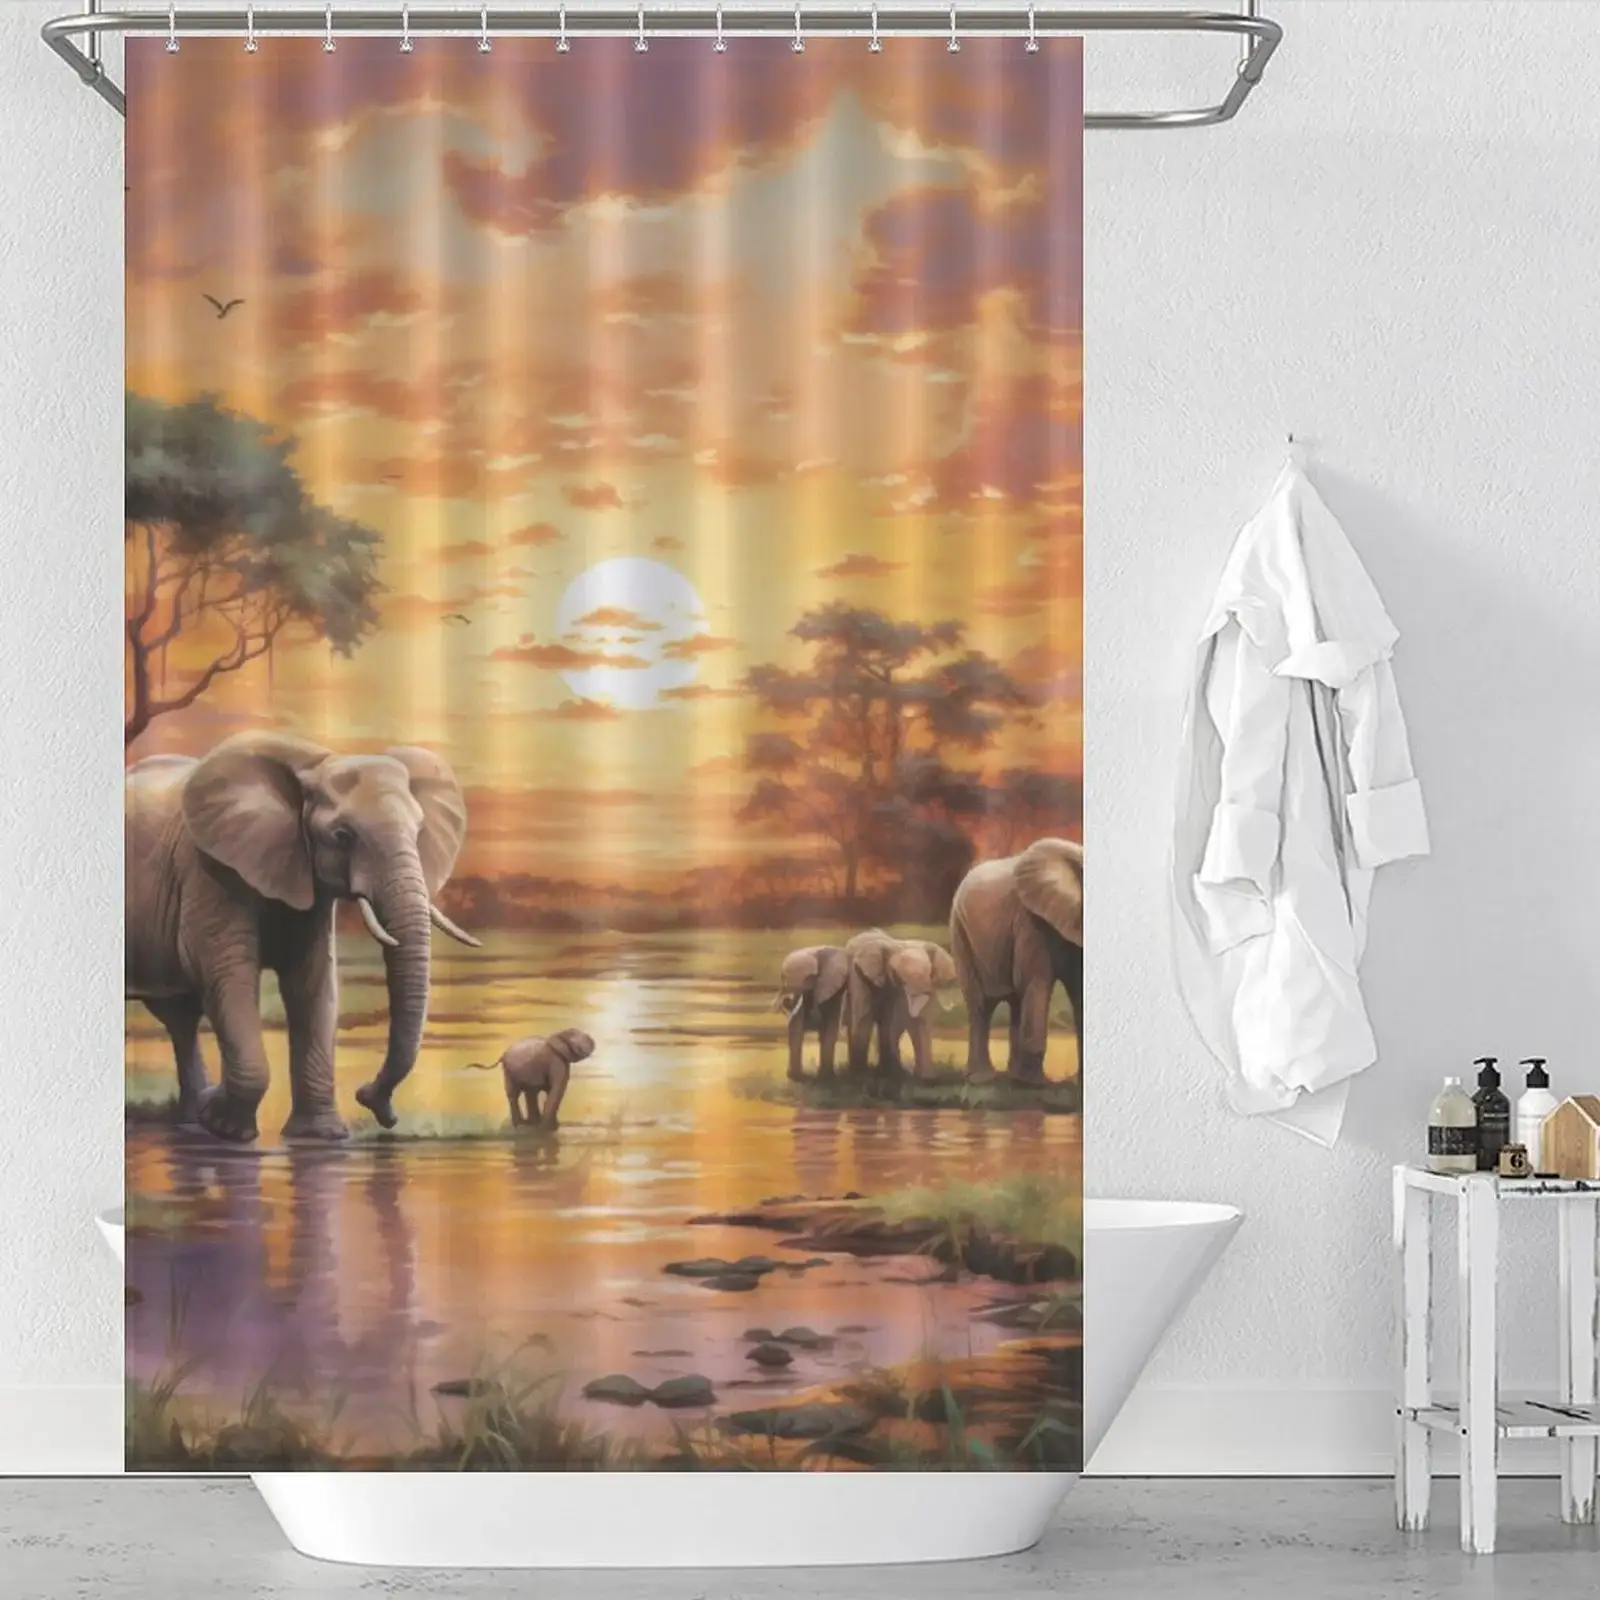 Unique Shower Curtains for Small Bathrooms: A shower curtain with elephants in the water at sunset.